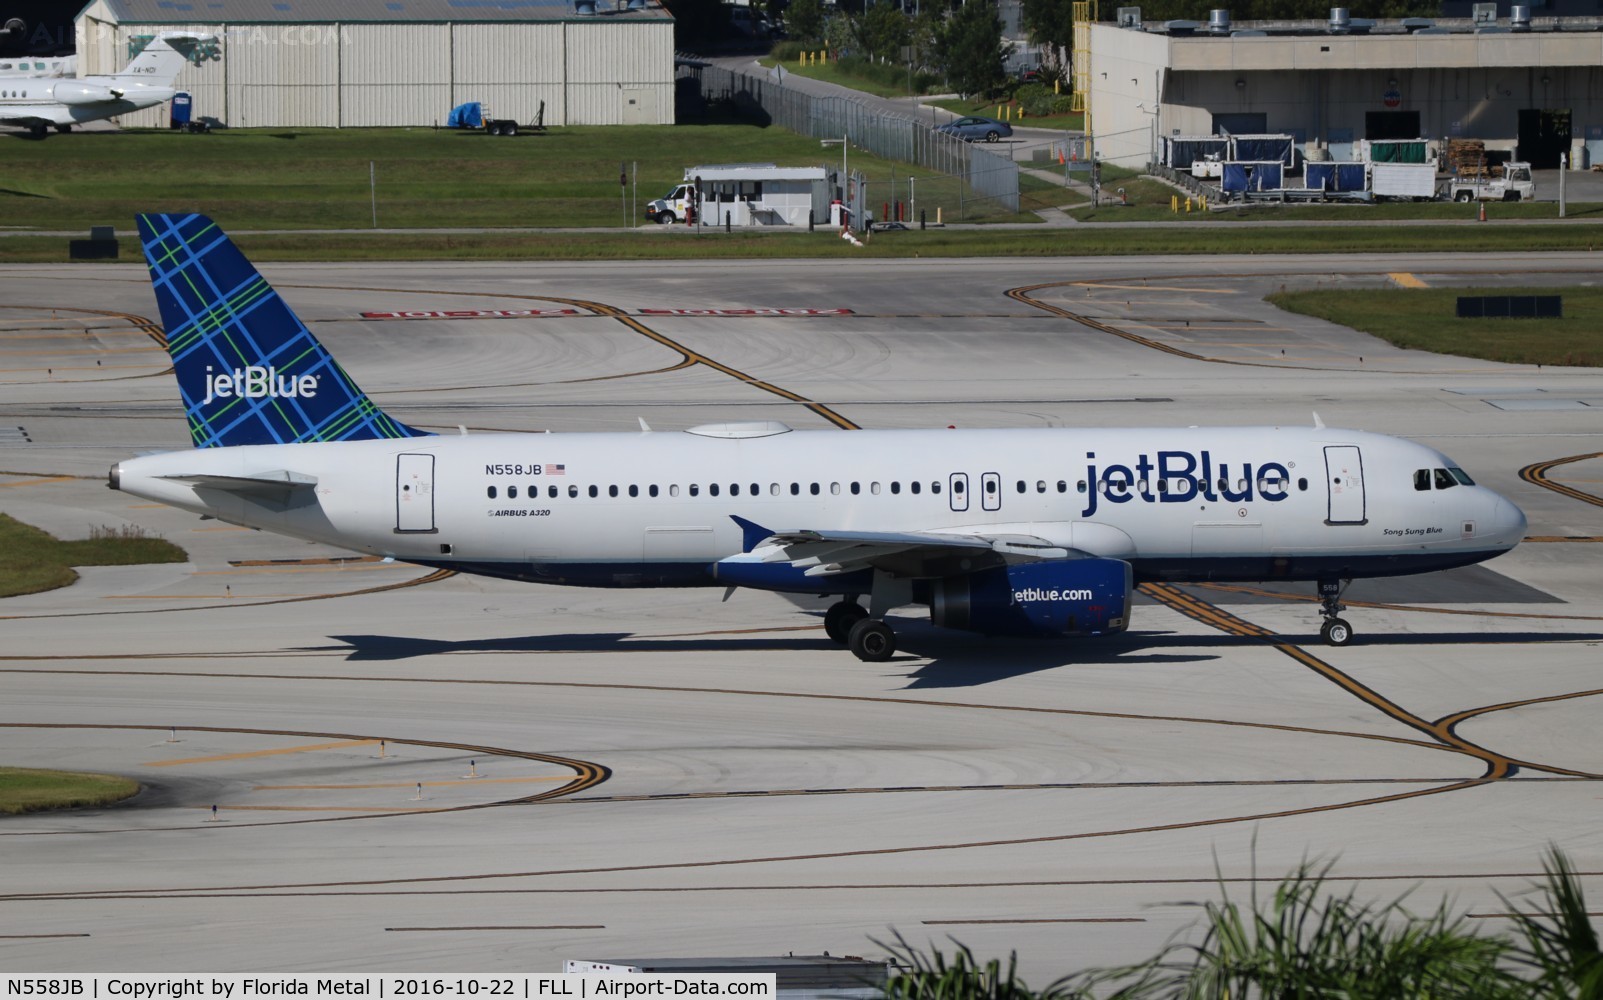 N558JB, 2003 Airbus A320-232 C/N 1915, Jet Blue in same spot again with revised livery and titles 2 years later